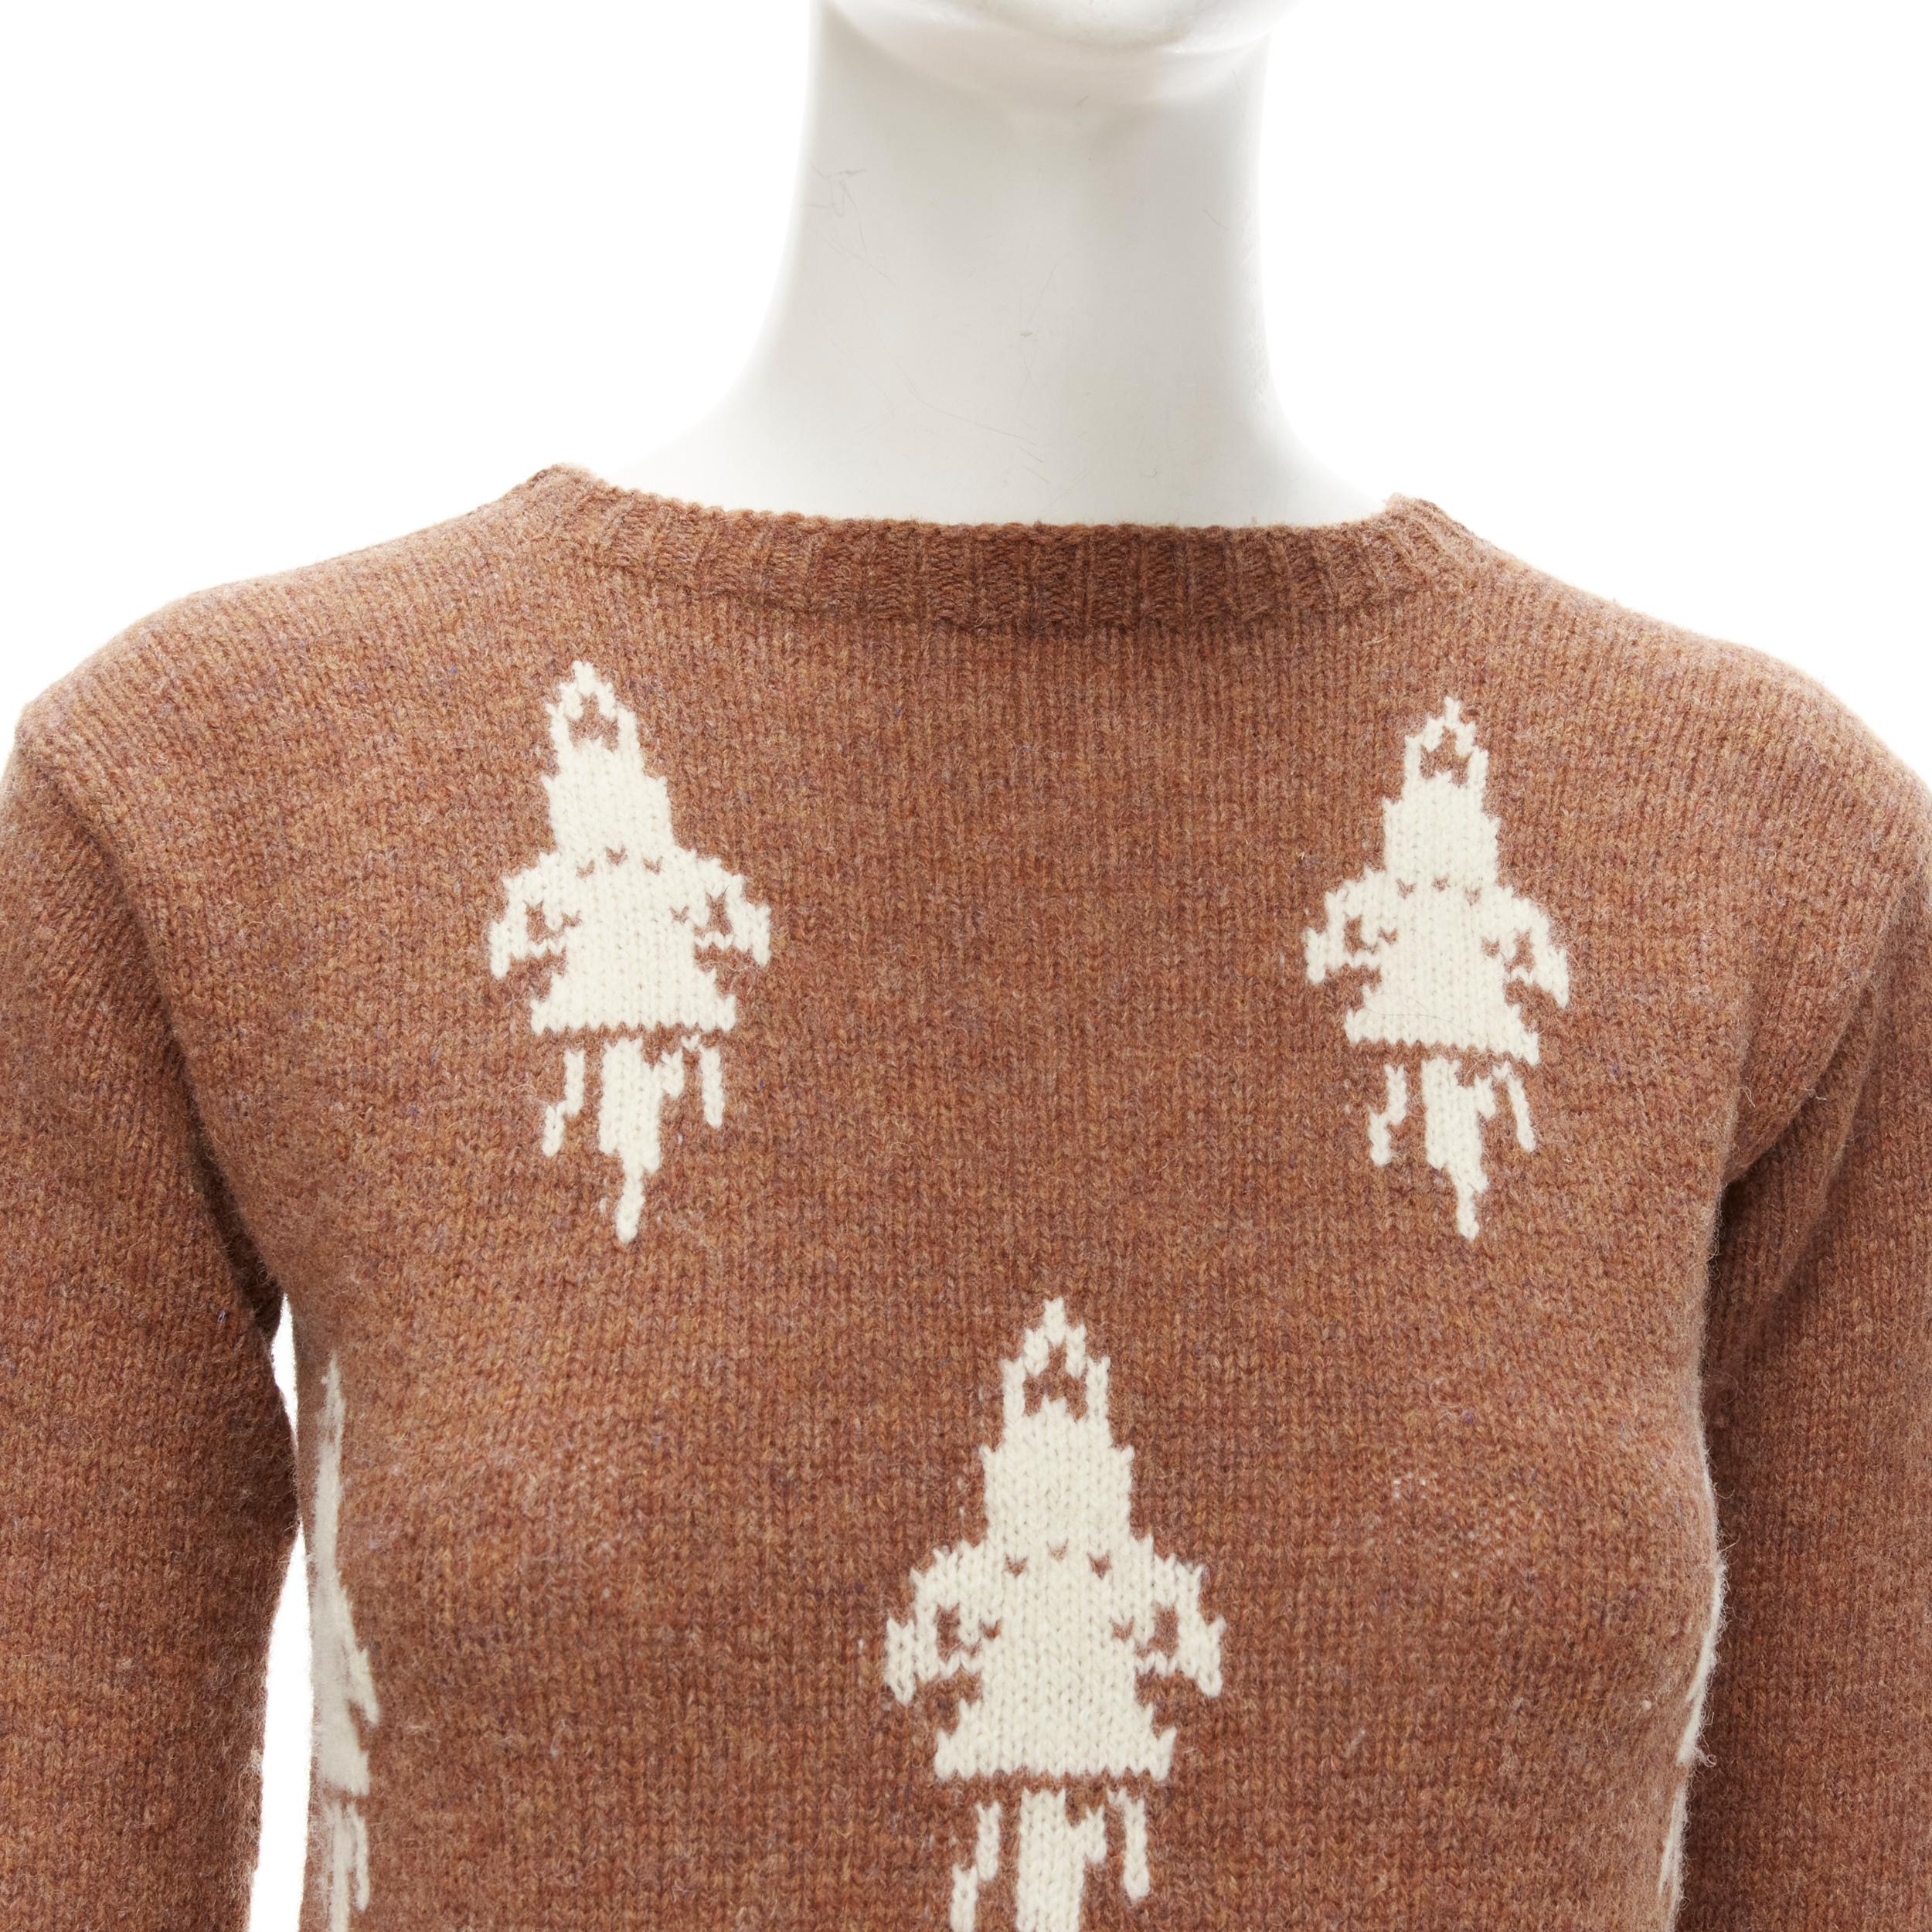 PRADA 2015 100% shetland wool brown rocket intarsia sweater IT36 XXS
Reference: TGAS/C01714
Brand: Prada
Designer: Miuccia Prada
Collection: 2015
Material: Wool
Color: Brown
Pattern: Abstract
Closure: Pullover
Made in: Italy

CONDITION:
Condition: